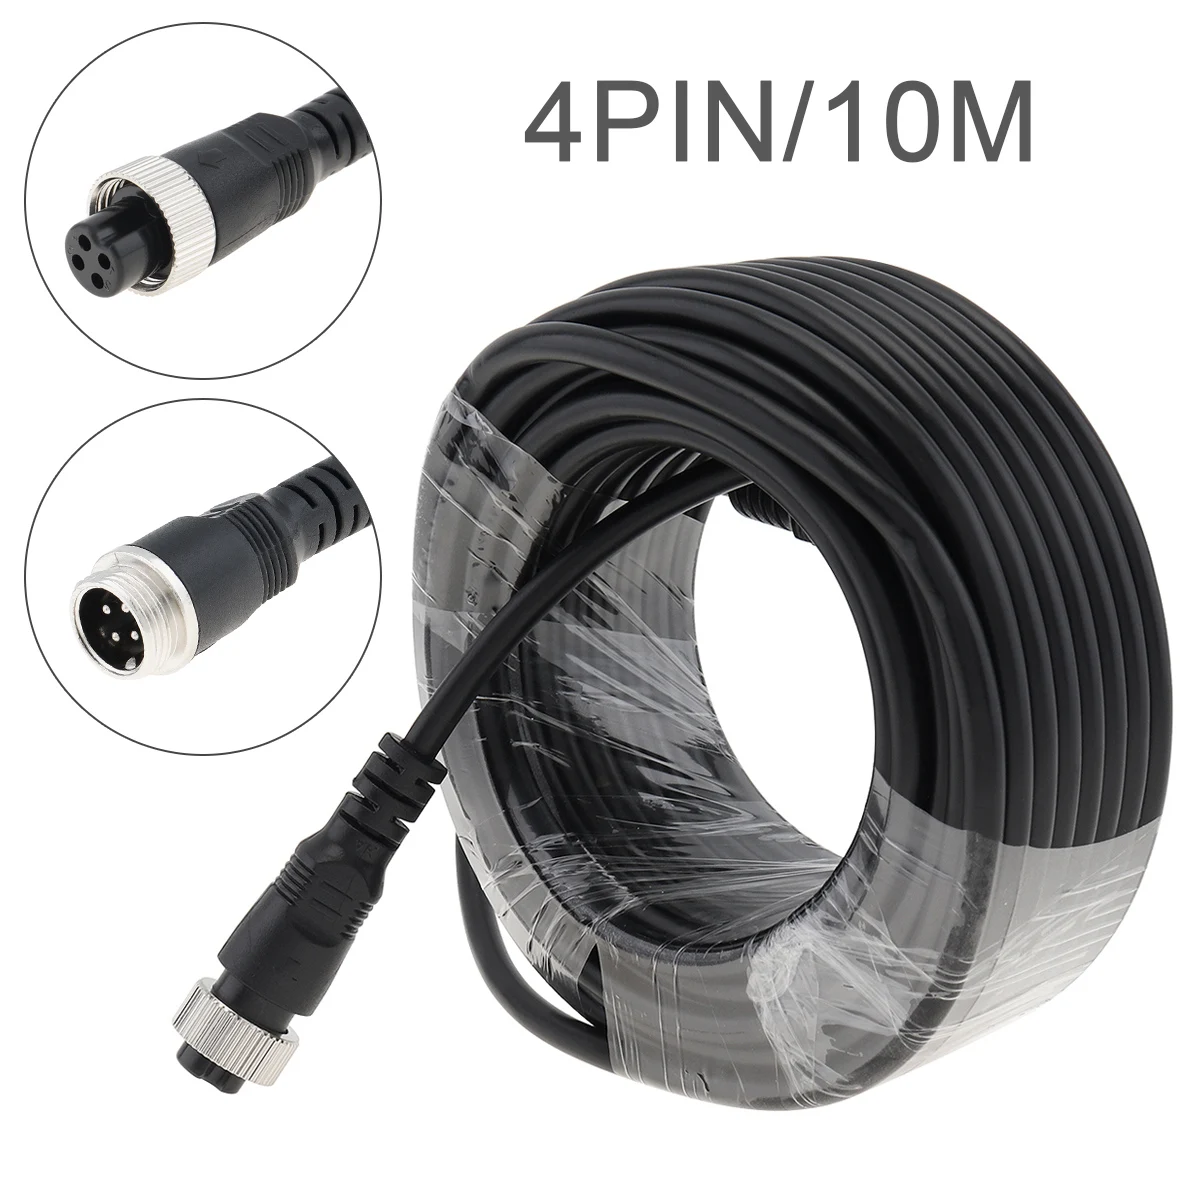 

4 Pin 10M Connector Plug Power AV Video Extension Cable for Car Truck BUS Caravans Motor home Reverse Parking Camera Monitors